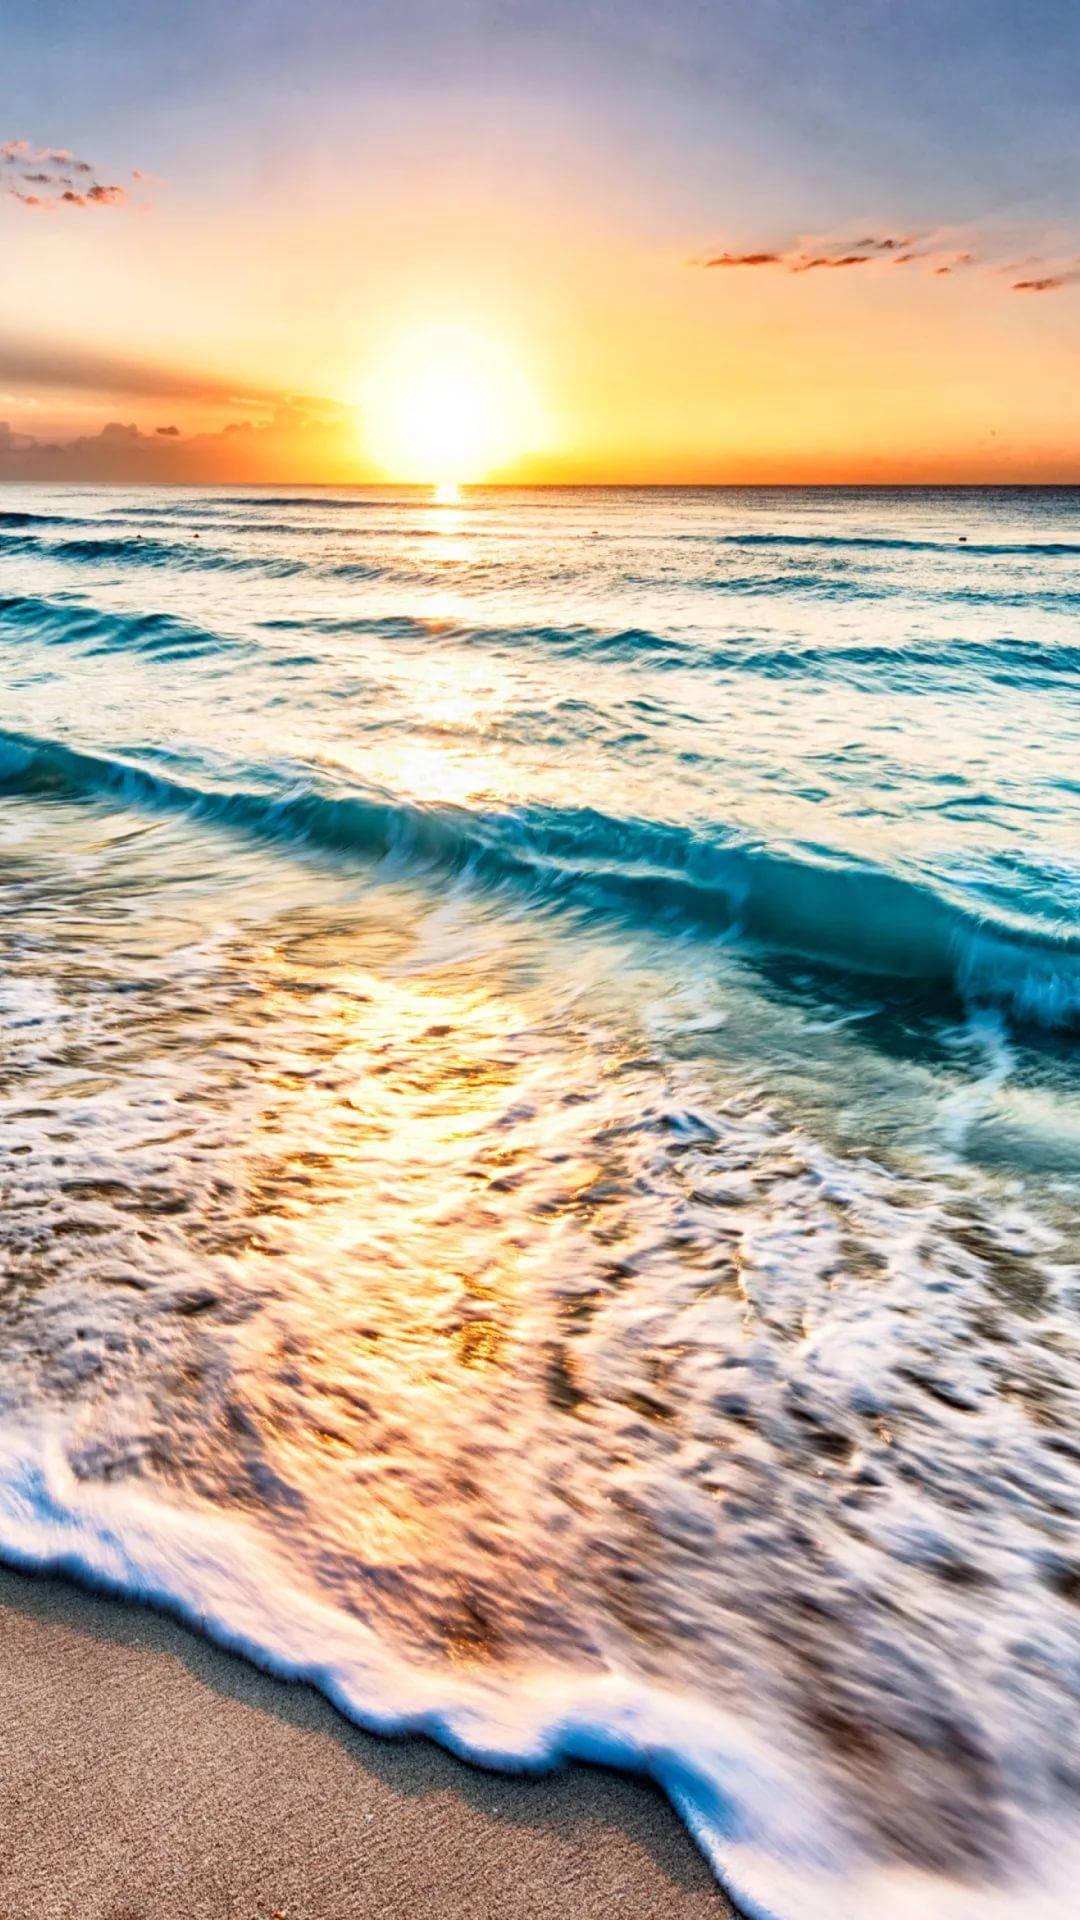 Free Beach Iphone Wallpaper Downloads, [300+] Beach Iphone Wallpapers for  FREE 